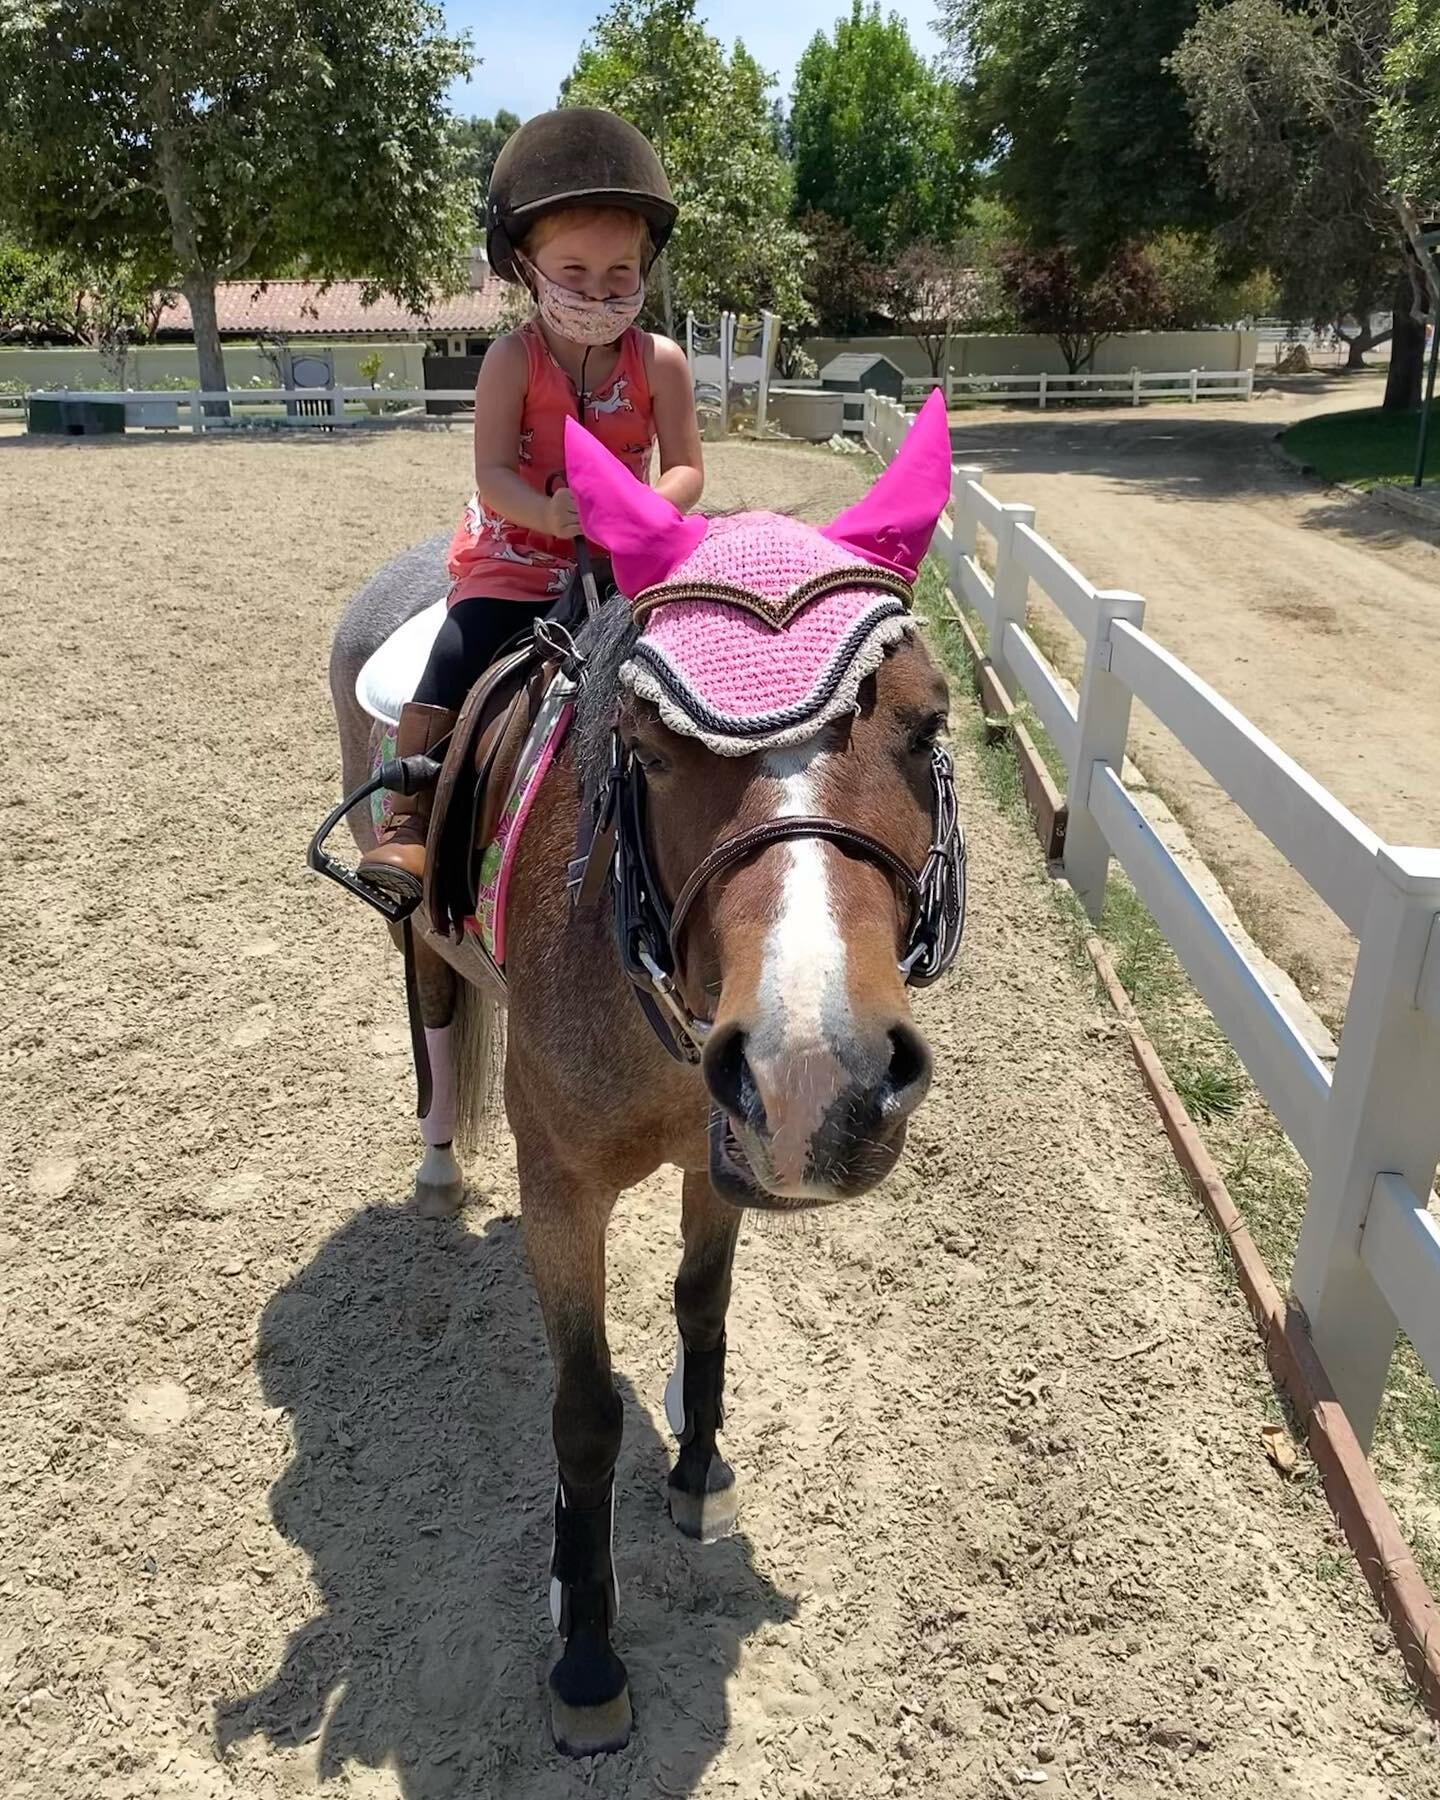 Half a second before this Ellie had a HUGE smile on her face that matched Ariel&rsquo;s. Our youngest rider who started at 2 1/2 is now 4, tacking up, trotting and learning her post! At the end of their lesson I get to see these girls smiling togethe